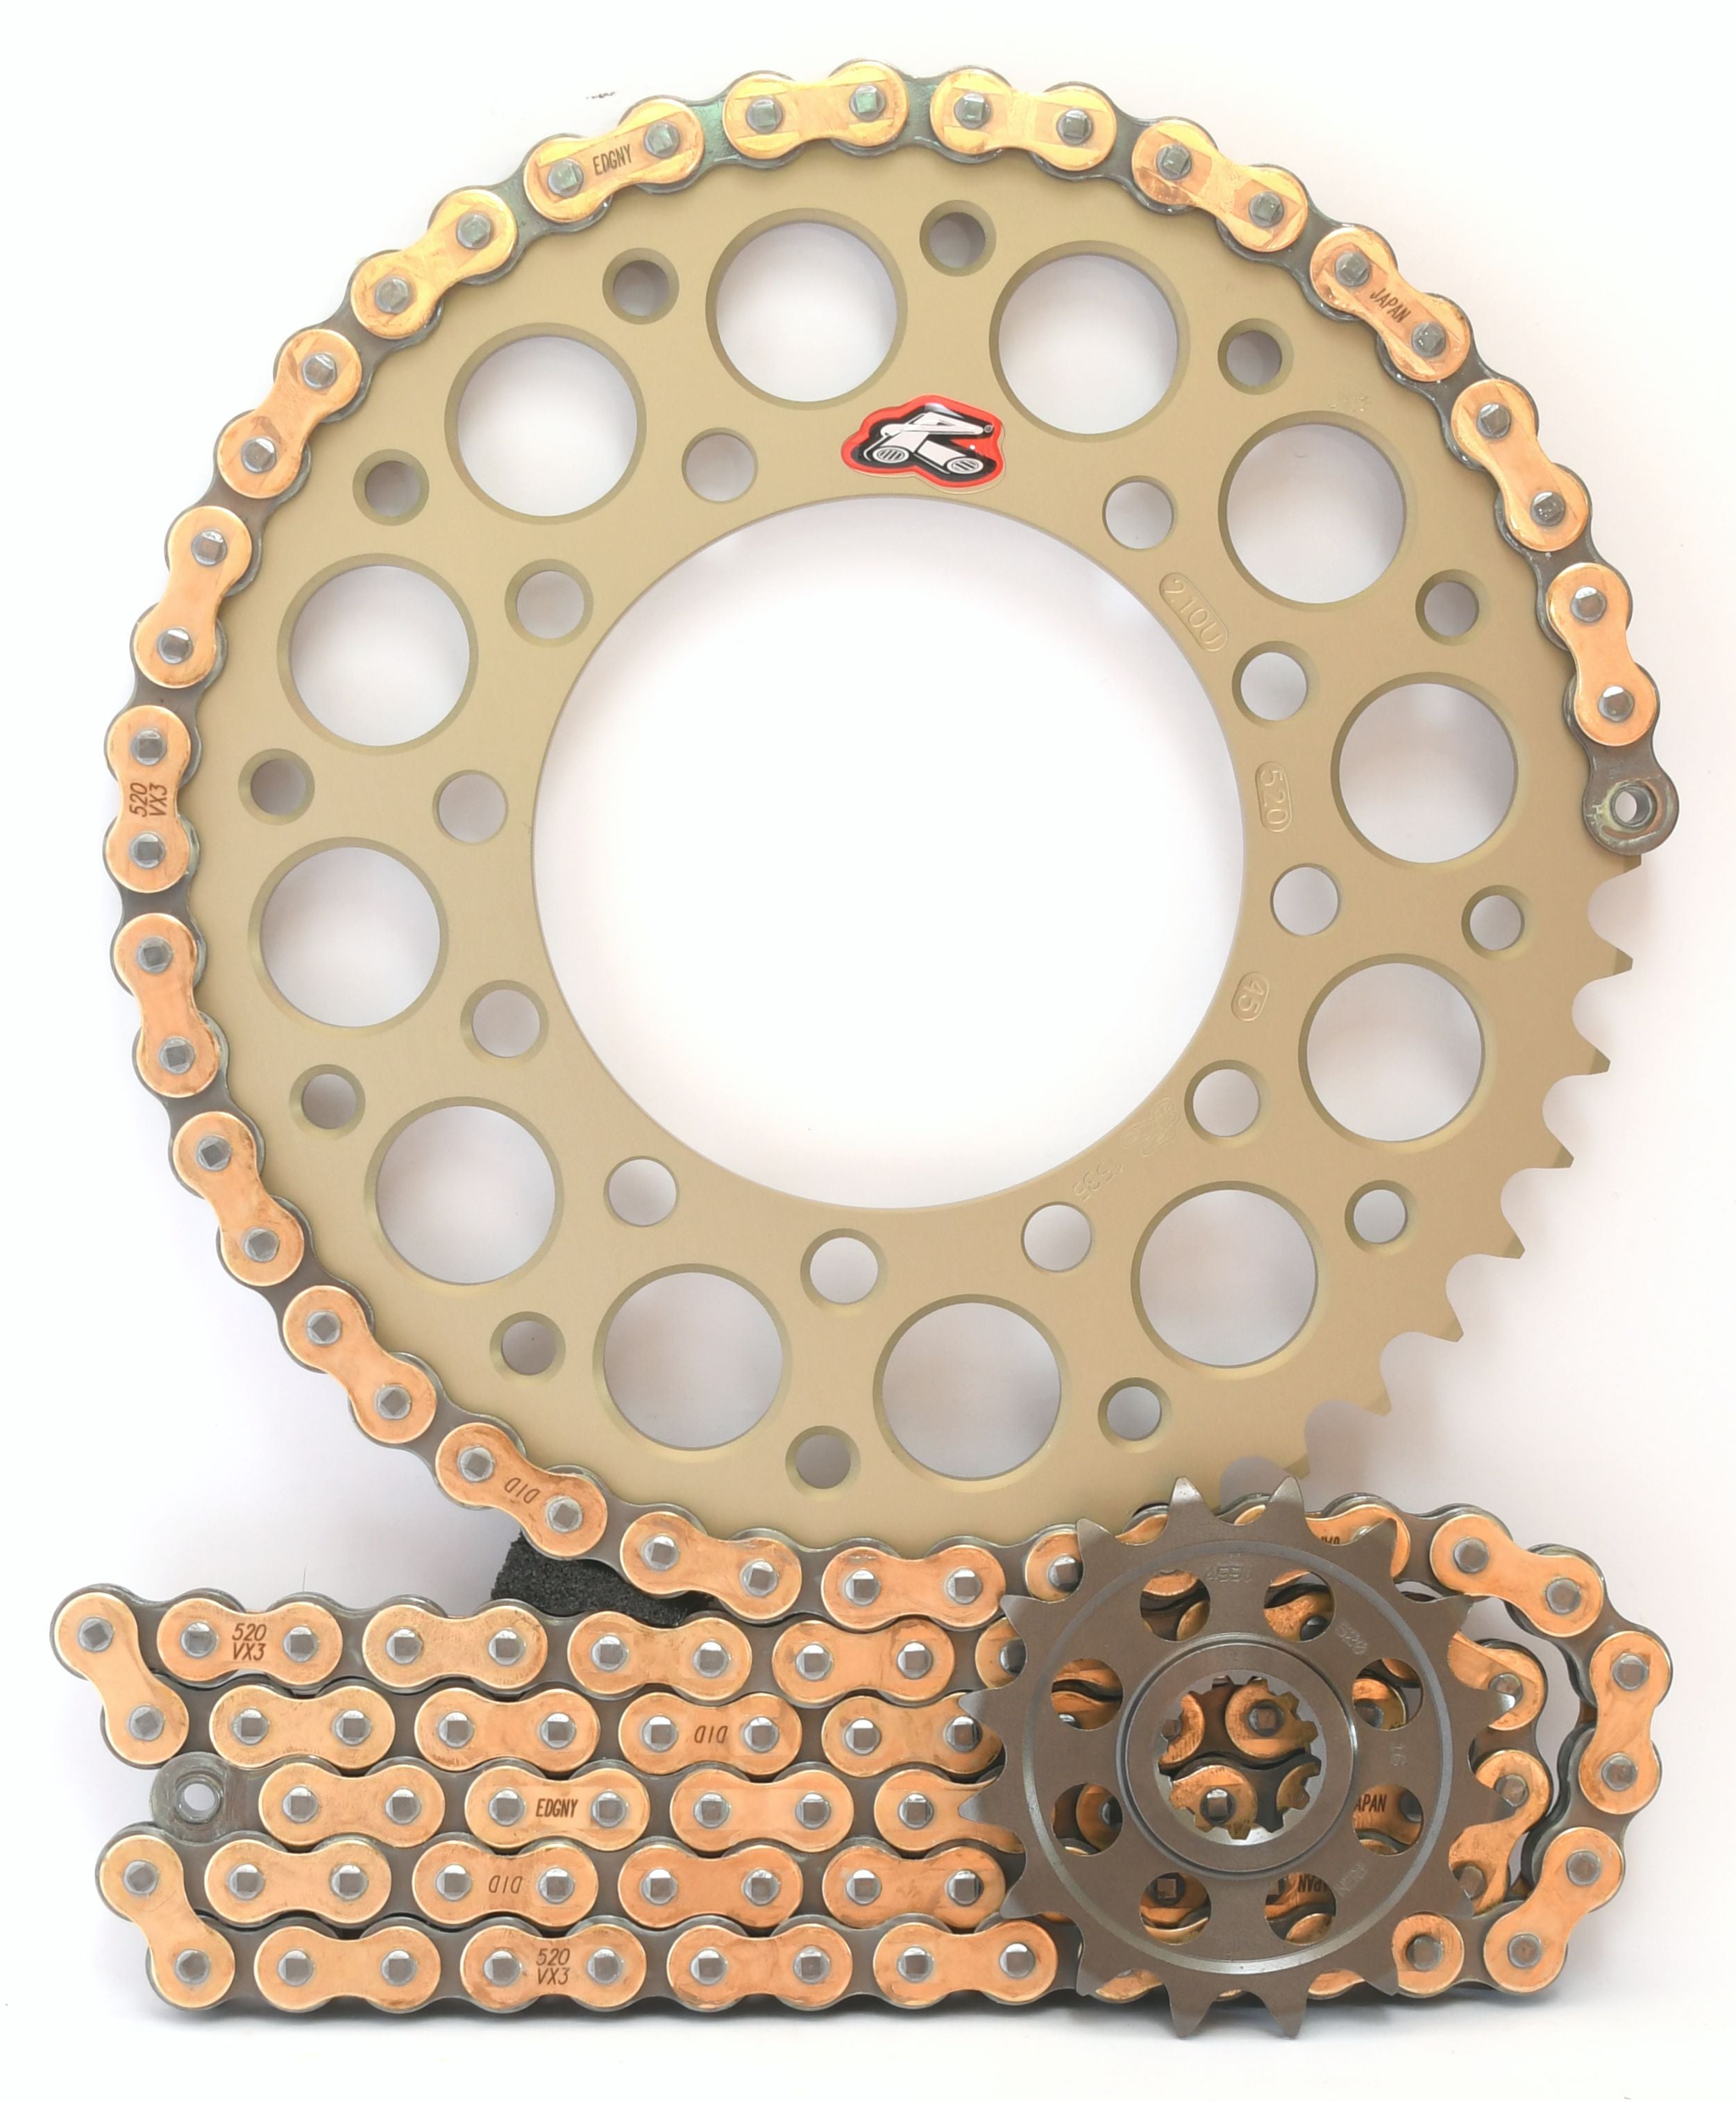 Renthal Ultralight and DID 520 Conversion Chain & Sprocket Kit for BMW S1000R and S1000RR 2015-2018 - Standard Gearing